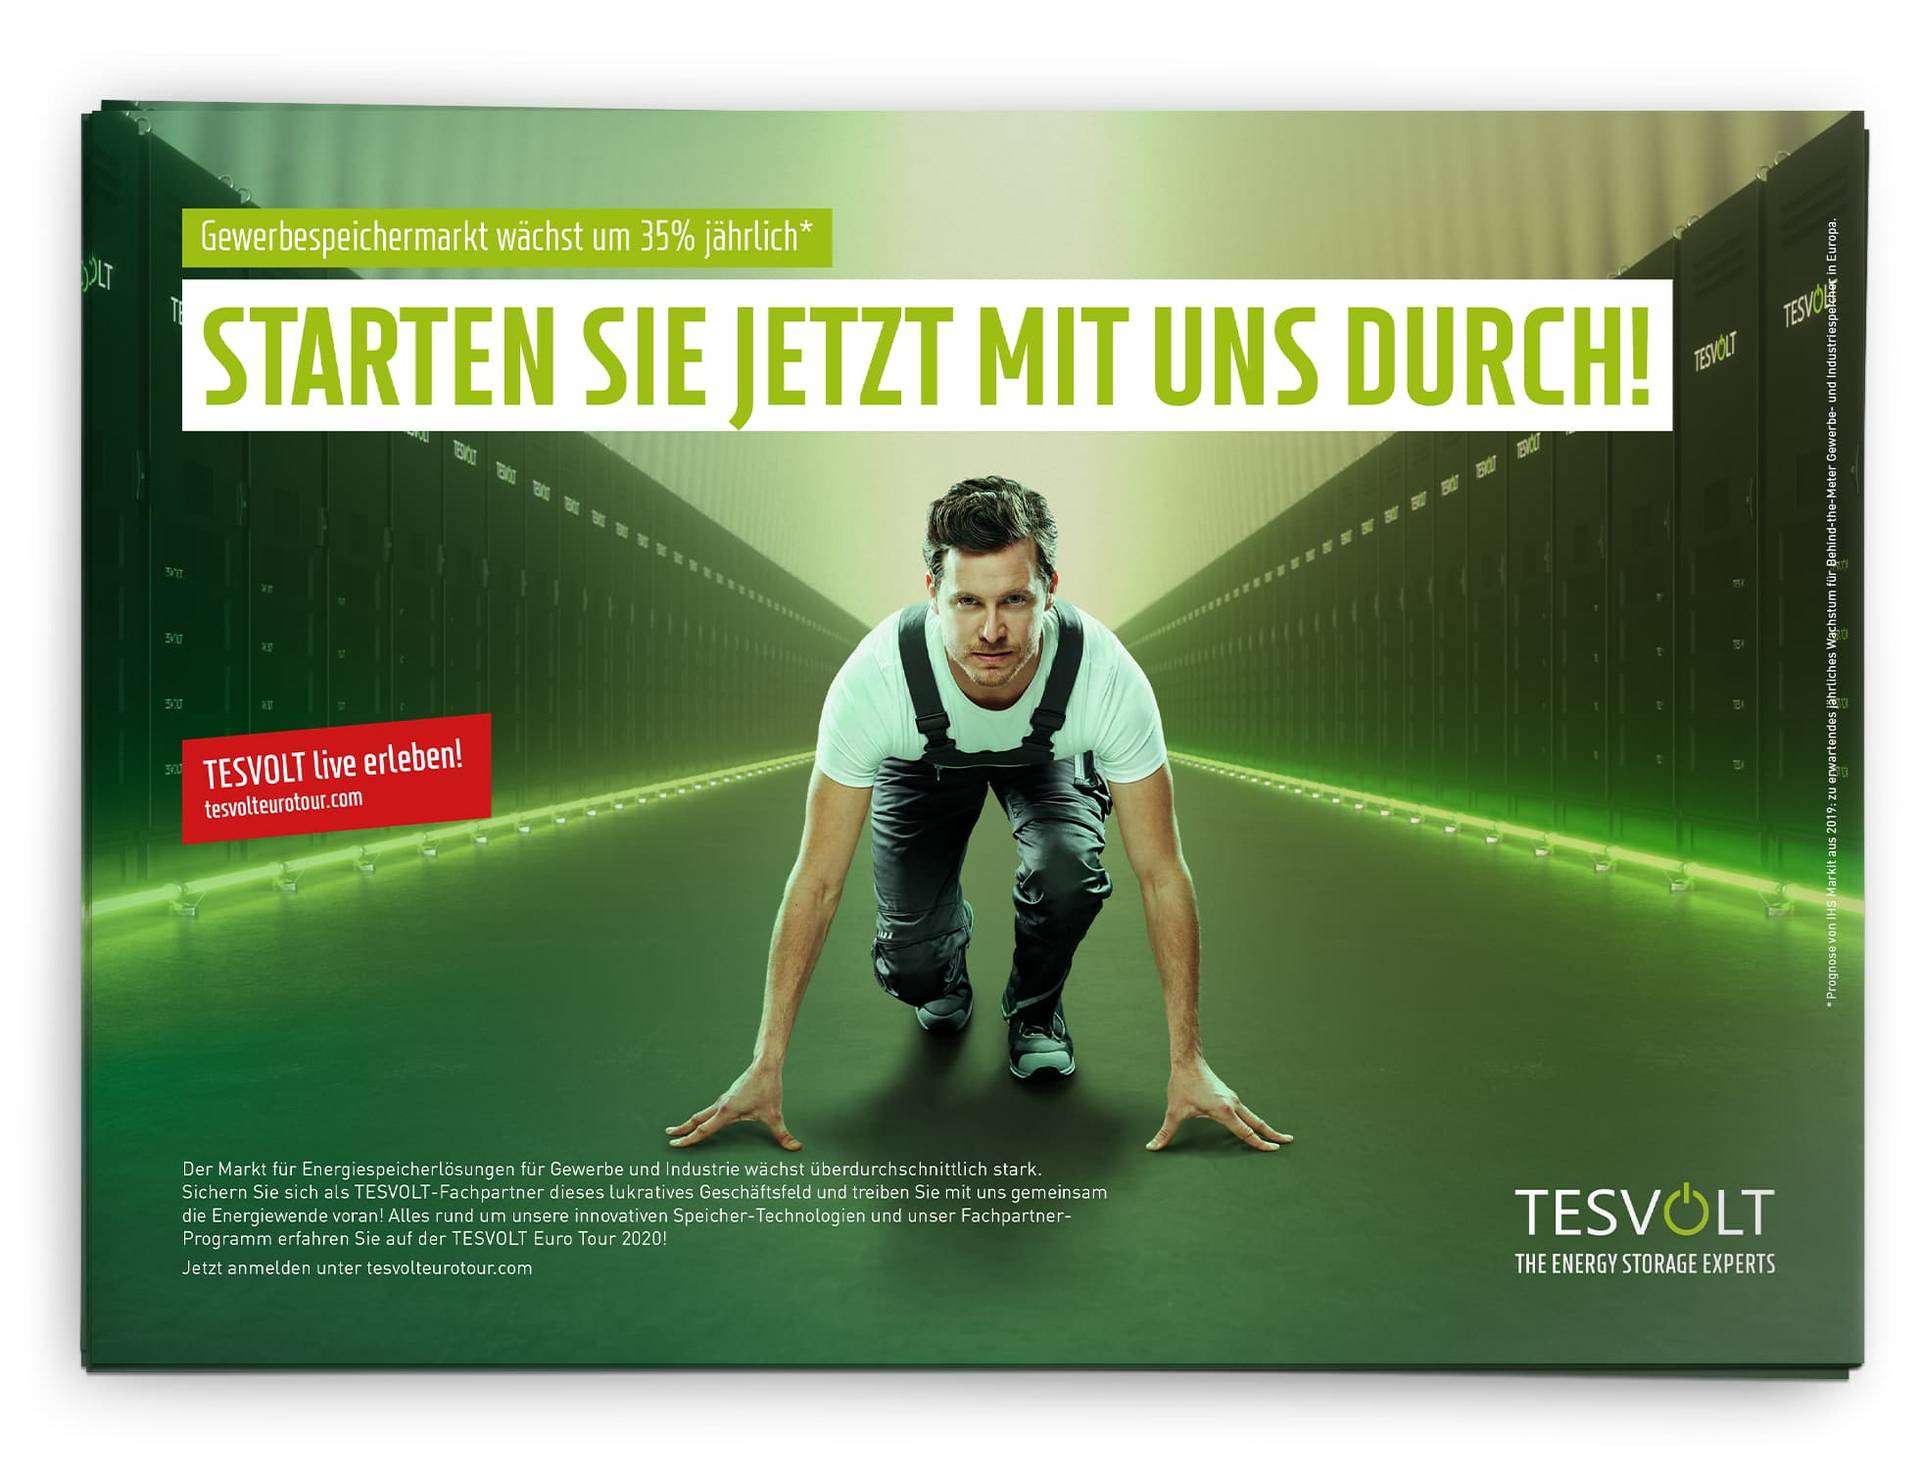 Print ad Campaign motif: On the right and left side of the picture, energy storage units form a trellis. In between, an electrician in the starting position. 